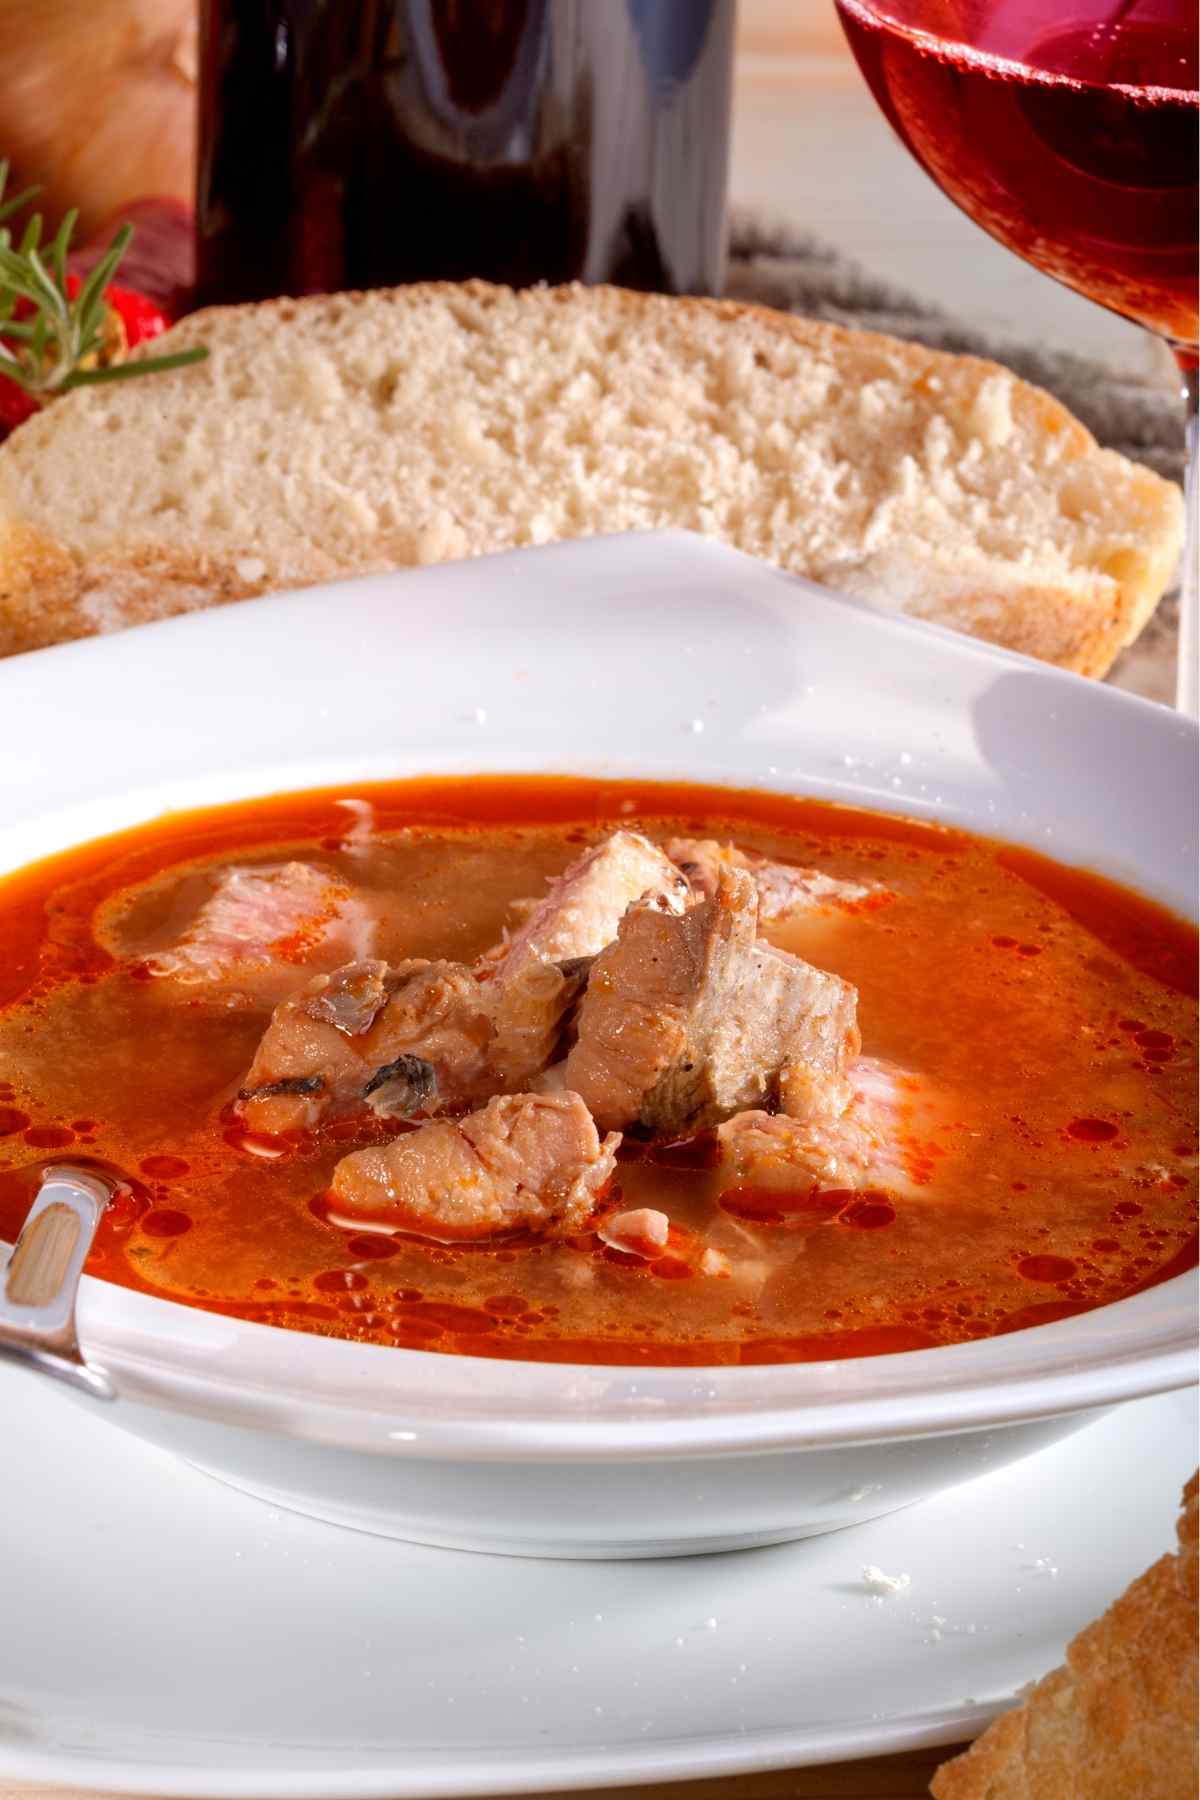 With chunks of flavorful fish, this easy homemade fish soup recipe is a comfort meal the whole family will love. Made with your favorite fish and spiced tomato broth, this hearty dish warms the soul.